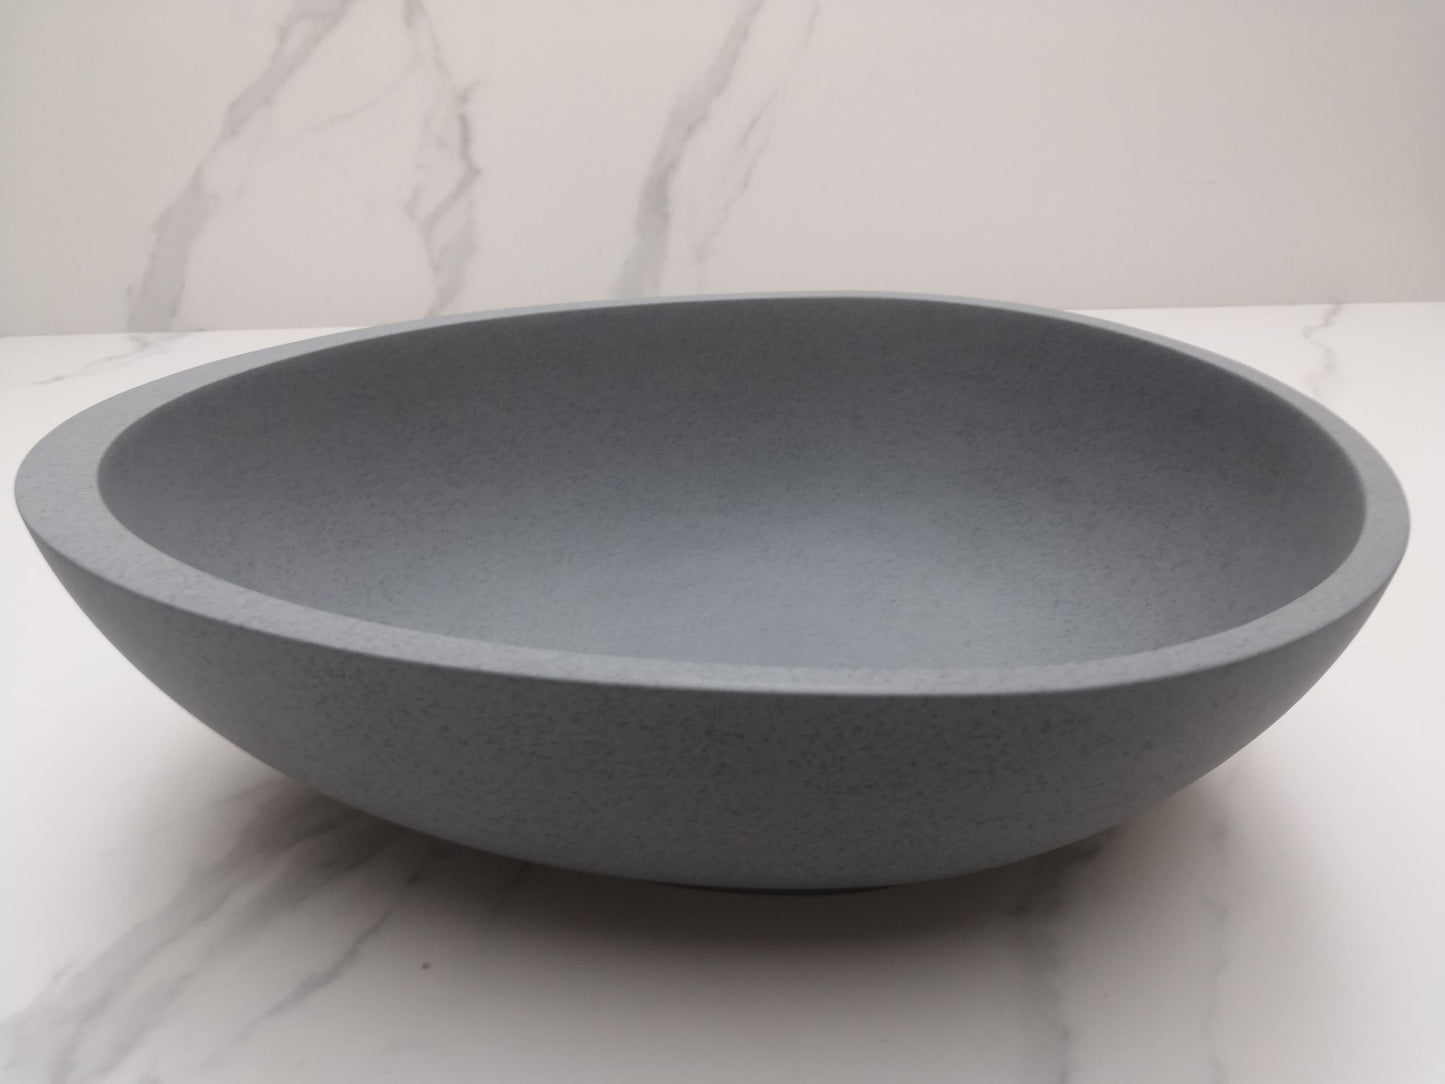 Egg shape Concrete Vessel Bathroom Sink in Grey without Faucet and Drain